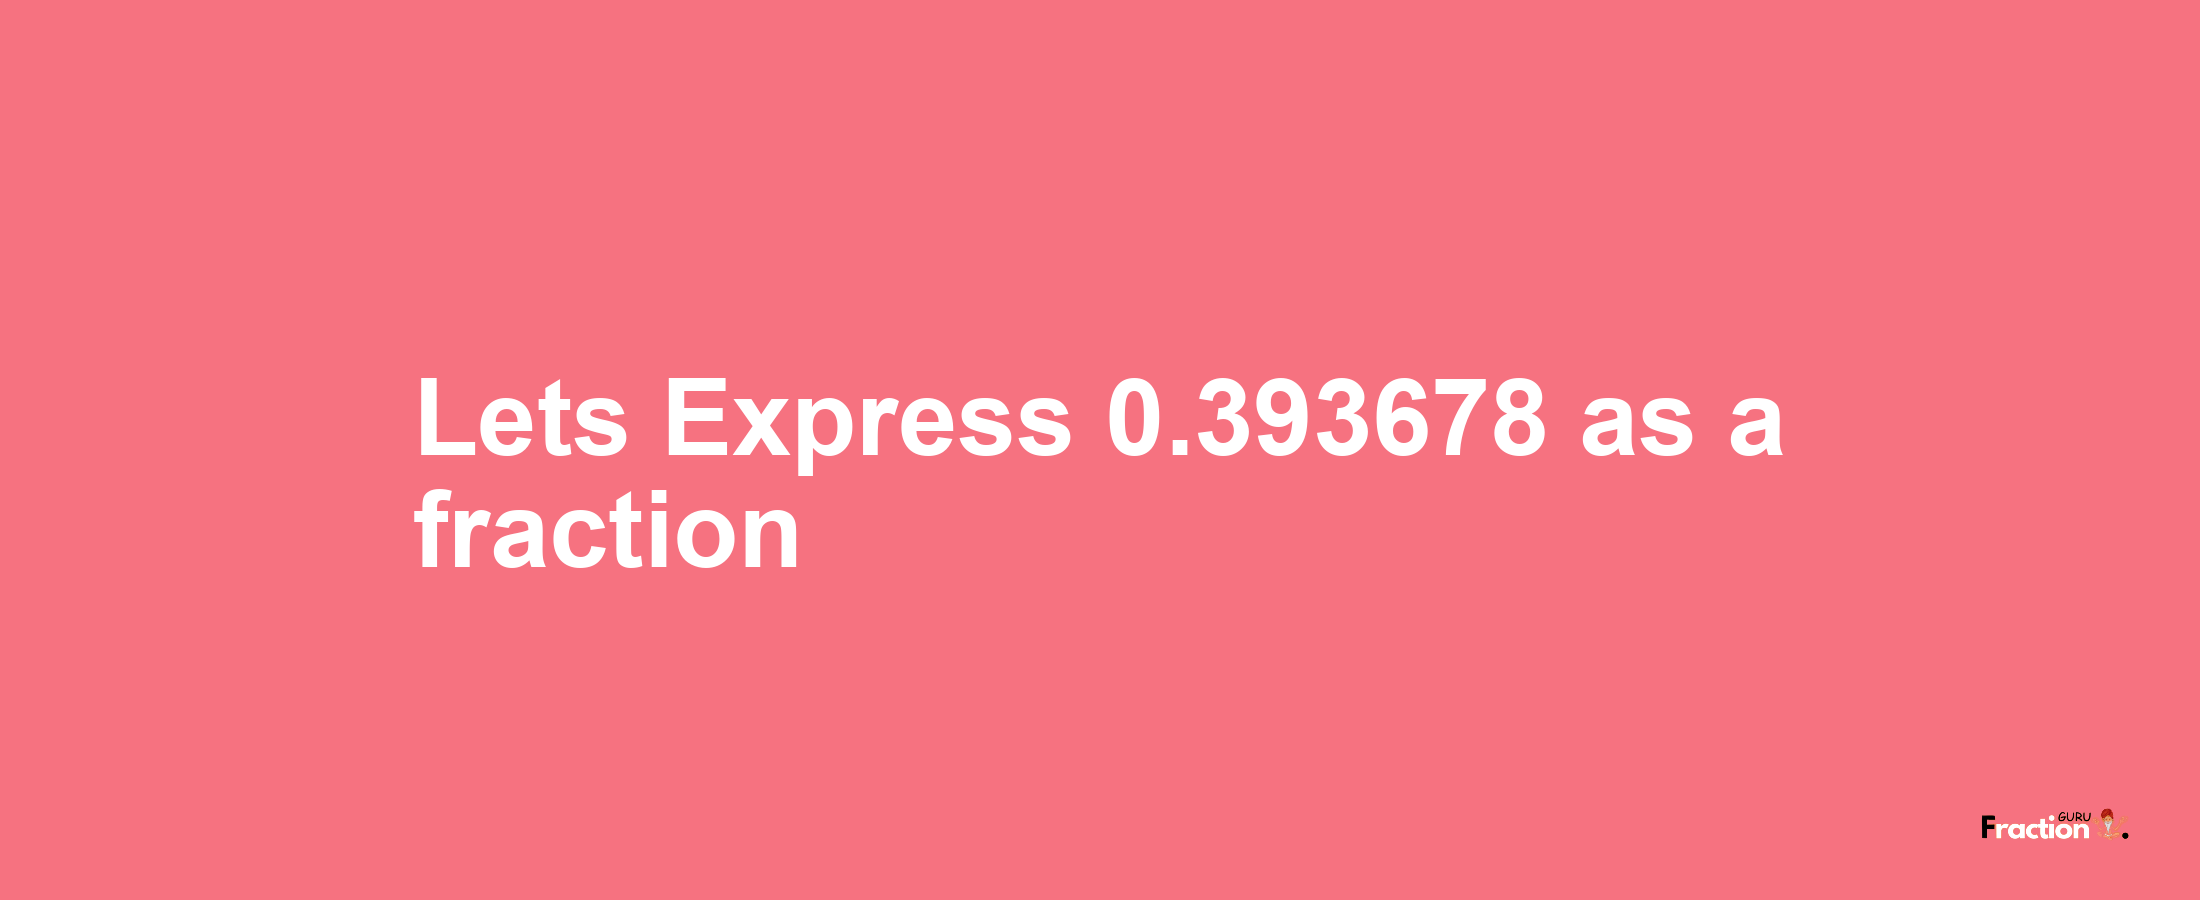 Lets Express 0.393678 as afraction